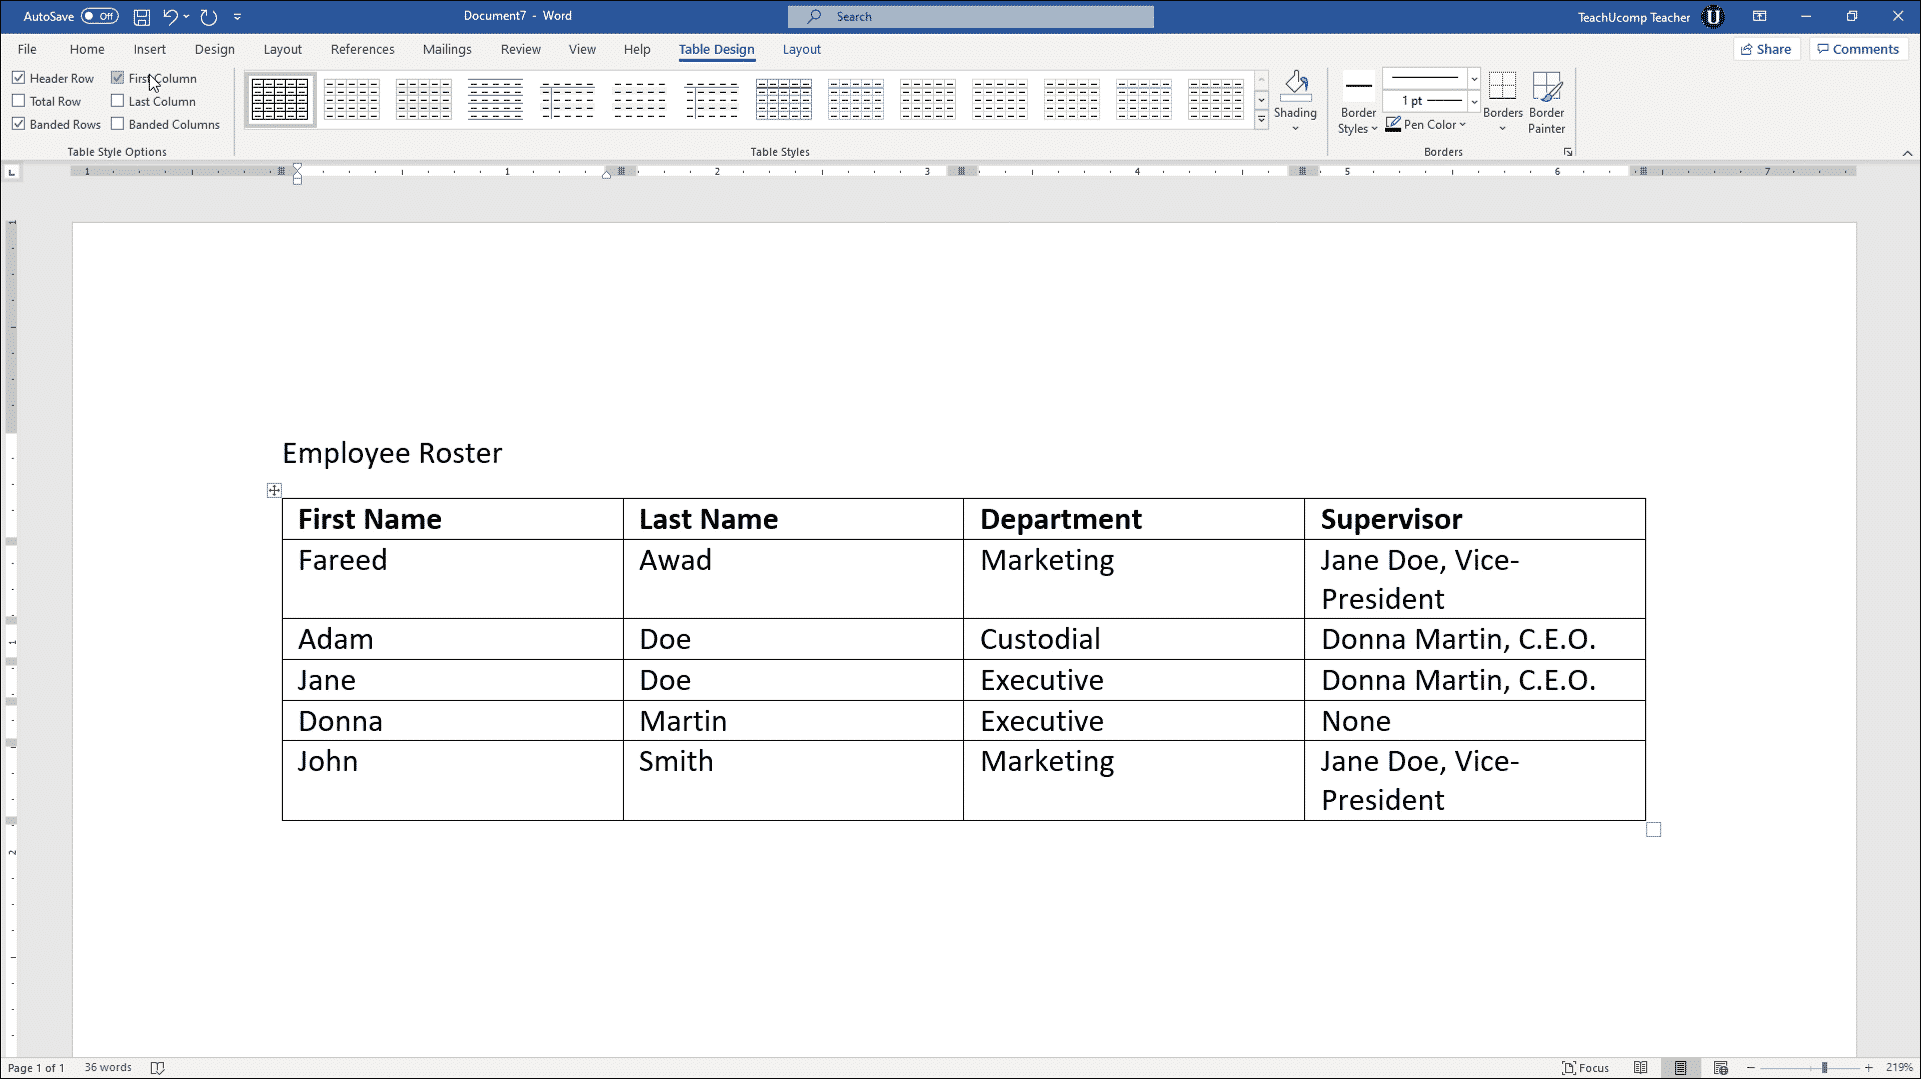 shade cells rows in table microsoft word for mac 2016